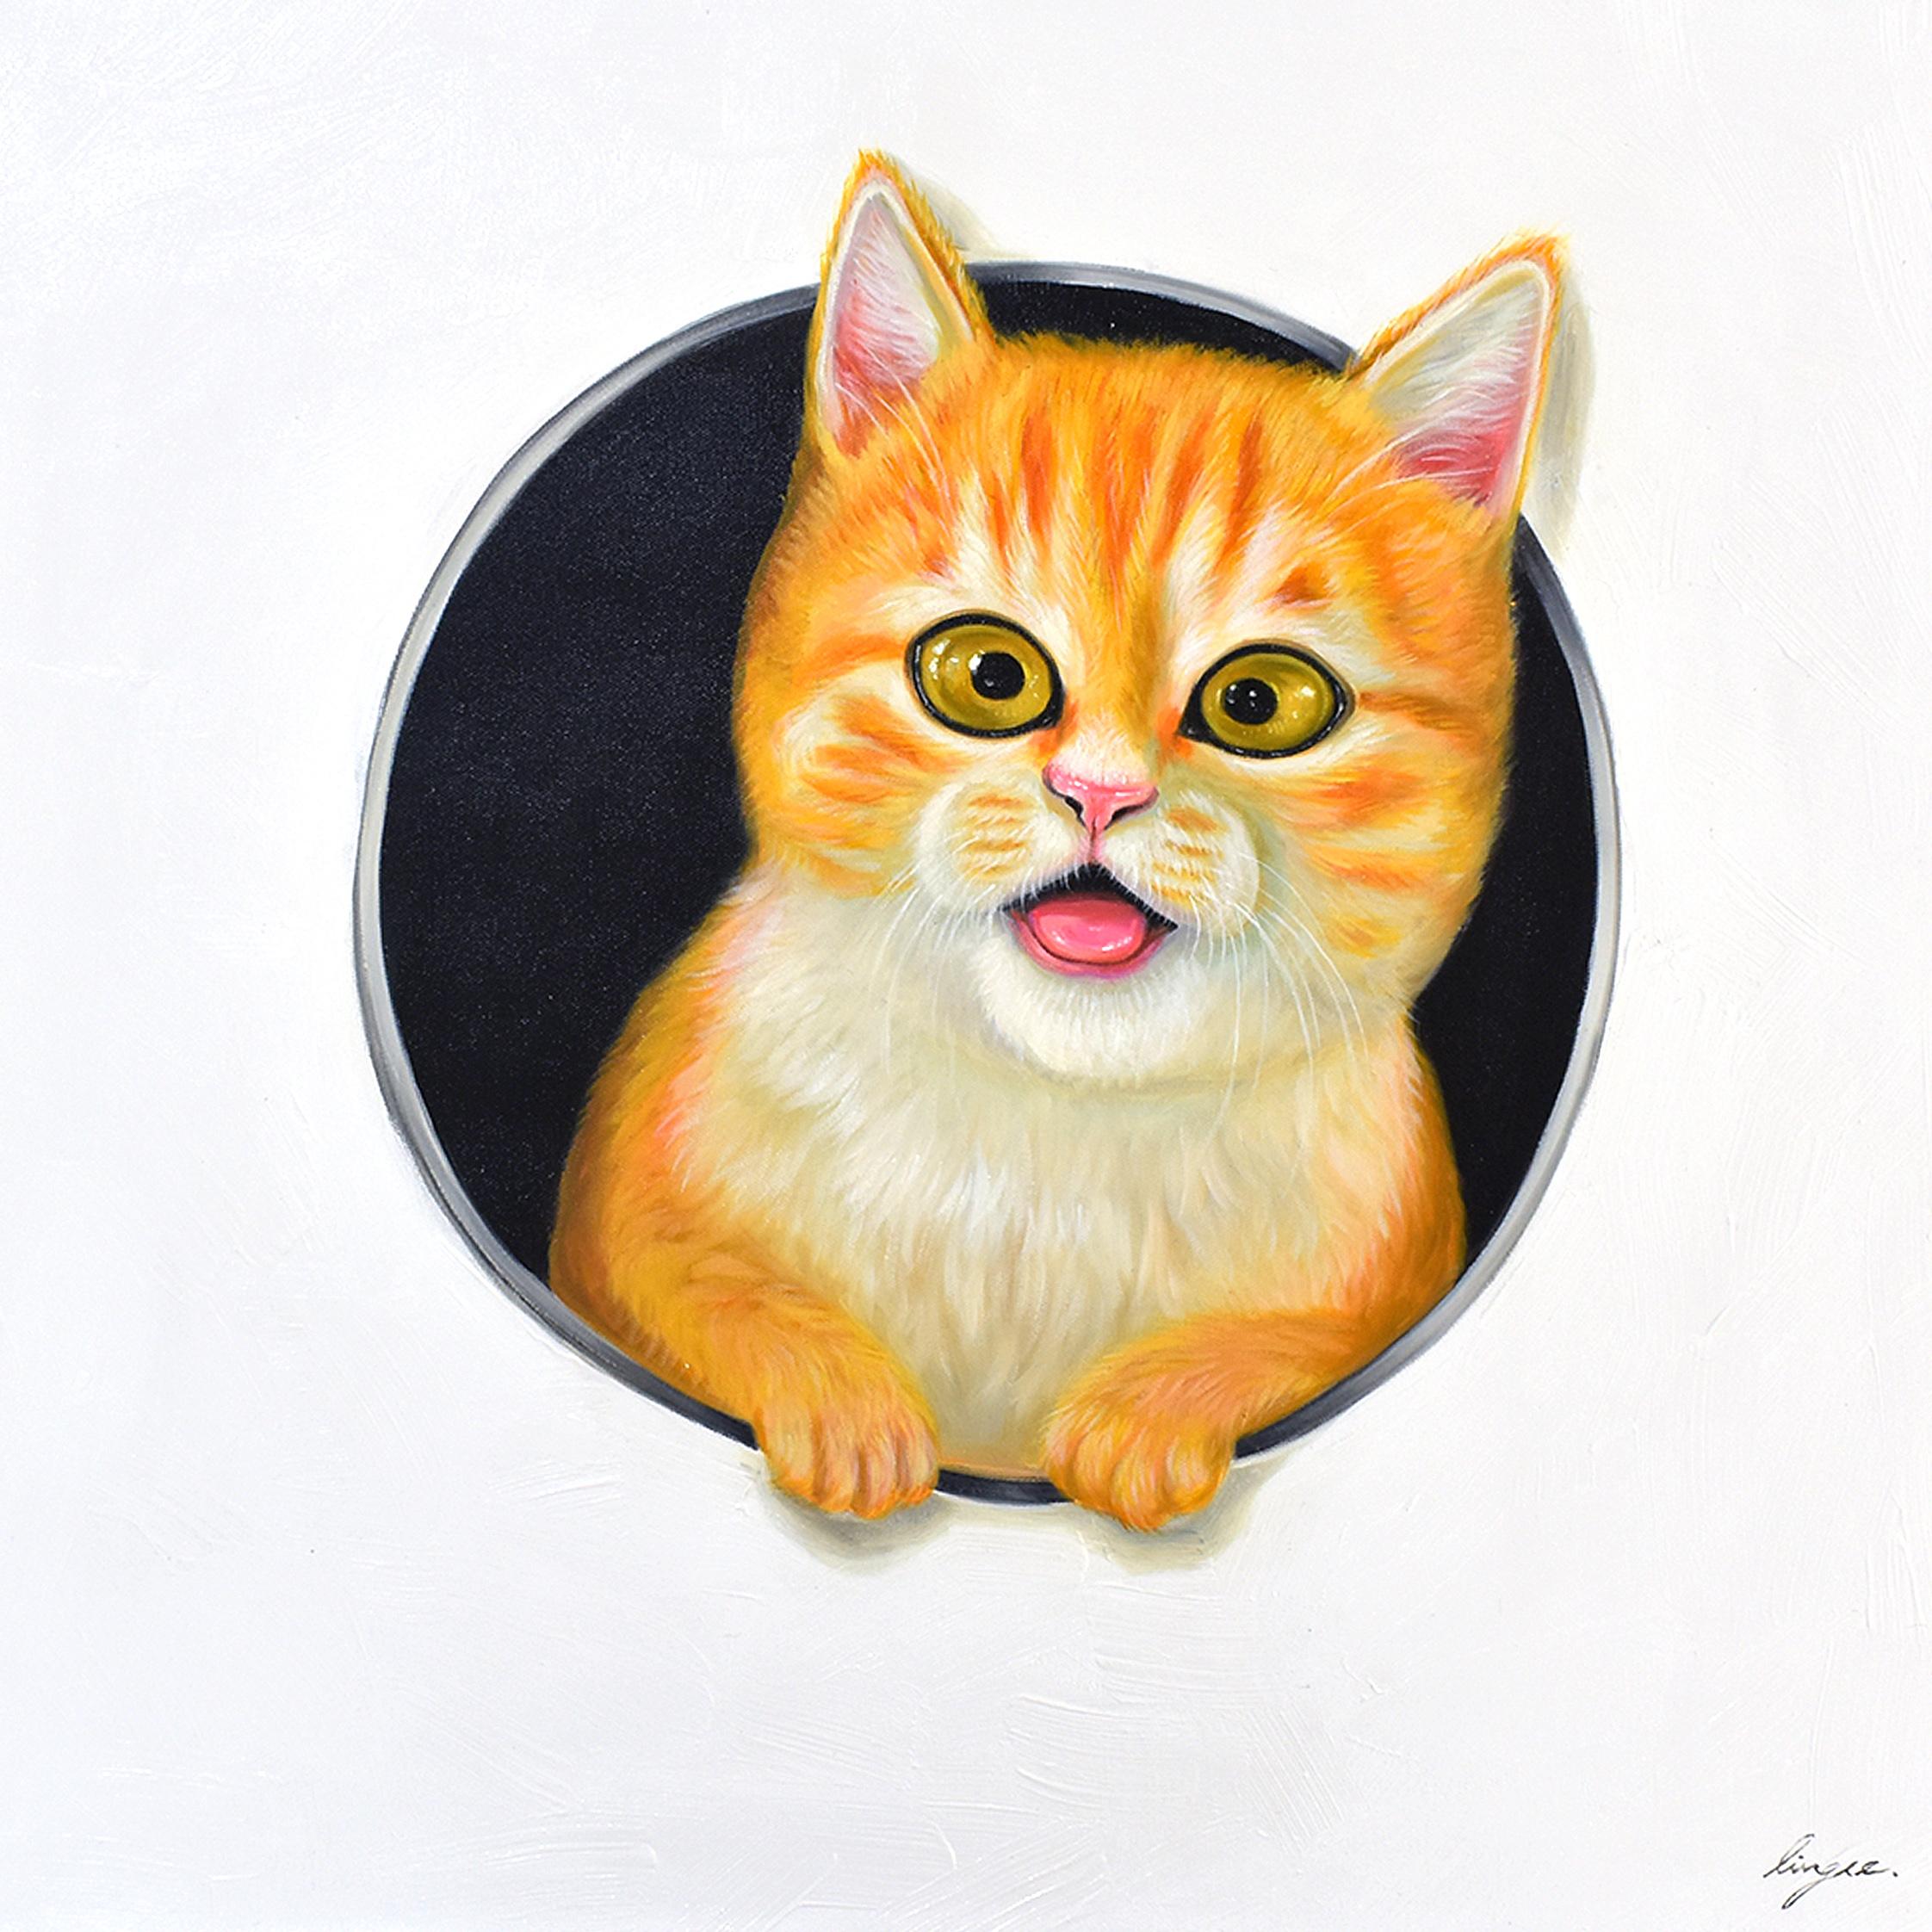 Lingee Bangkhuntod Animal Painting - Peeking Cats 2. Cat looking Through a Hole. Adorable Orange Cat Oil Painting